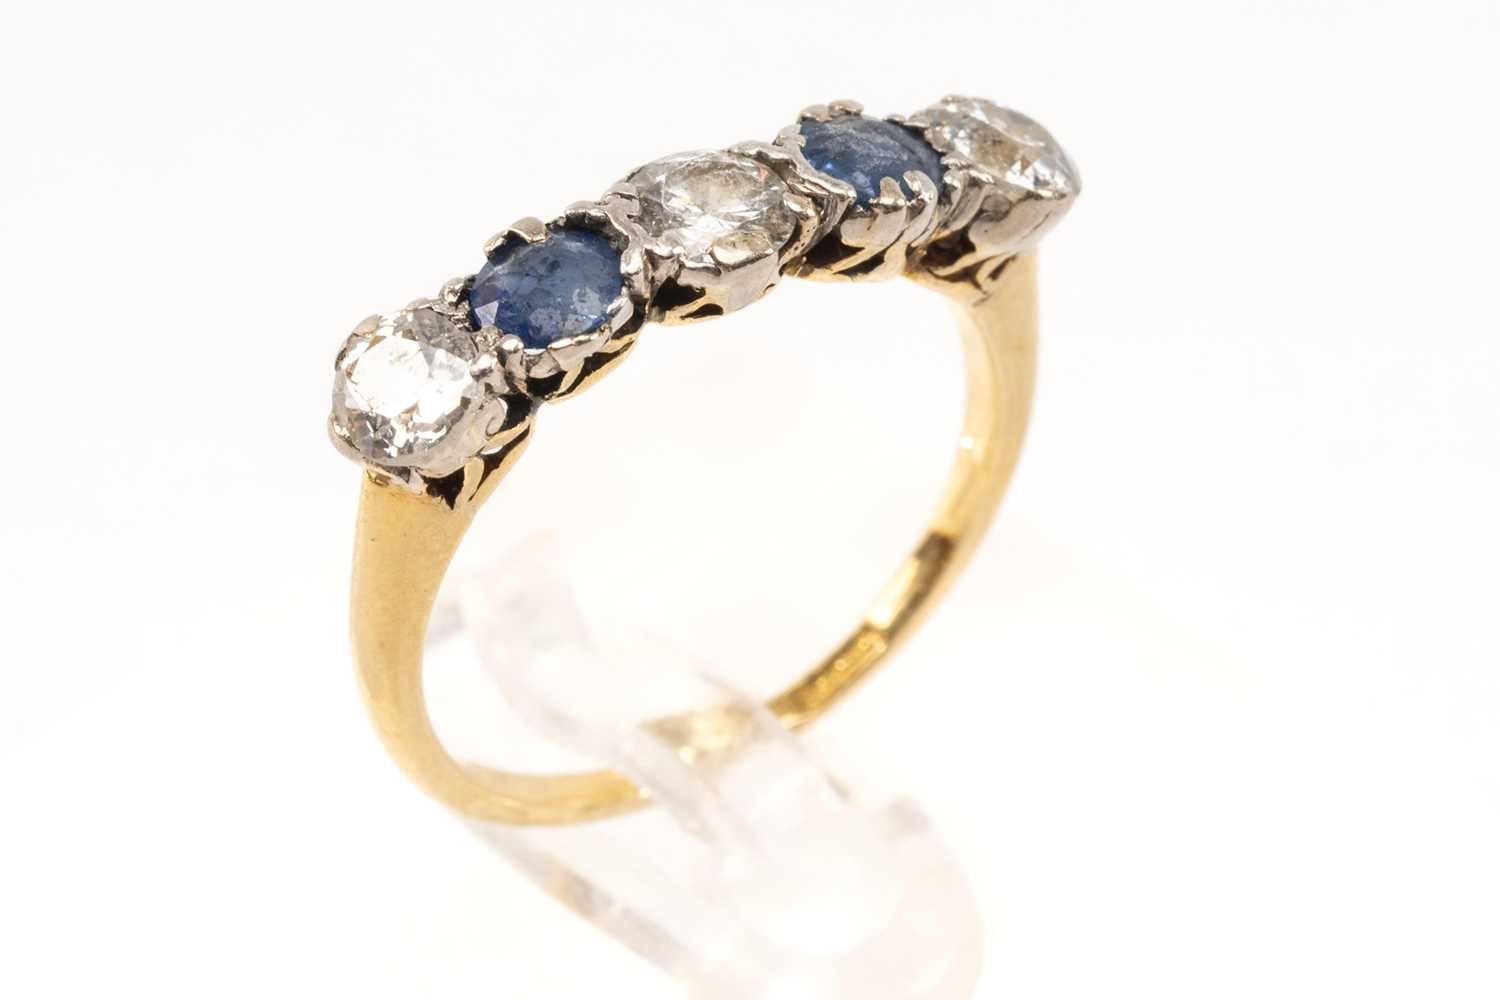 18CT GOLD FIVE STONE DIAMOND & SAPPHIRE RING, ring size M 1/2, 2.7gms Provenance: private collection - Image 2 of 2